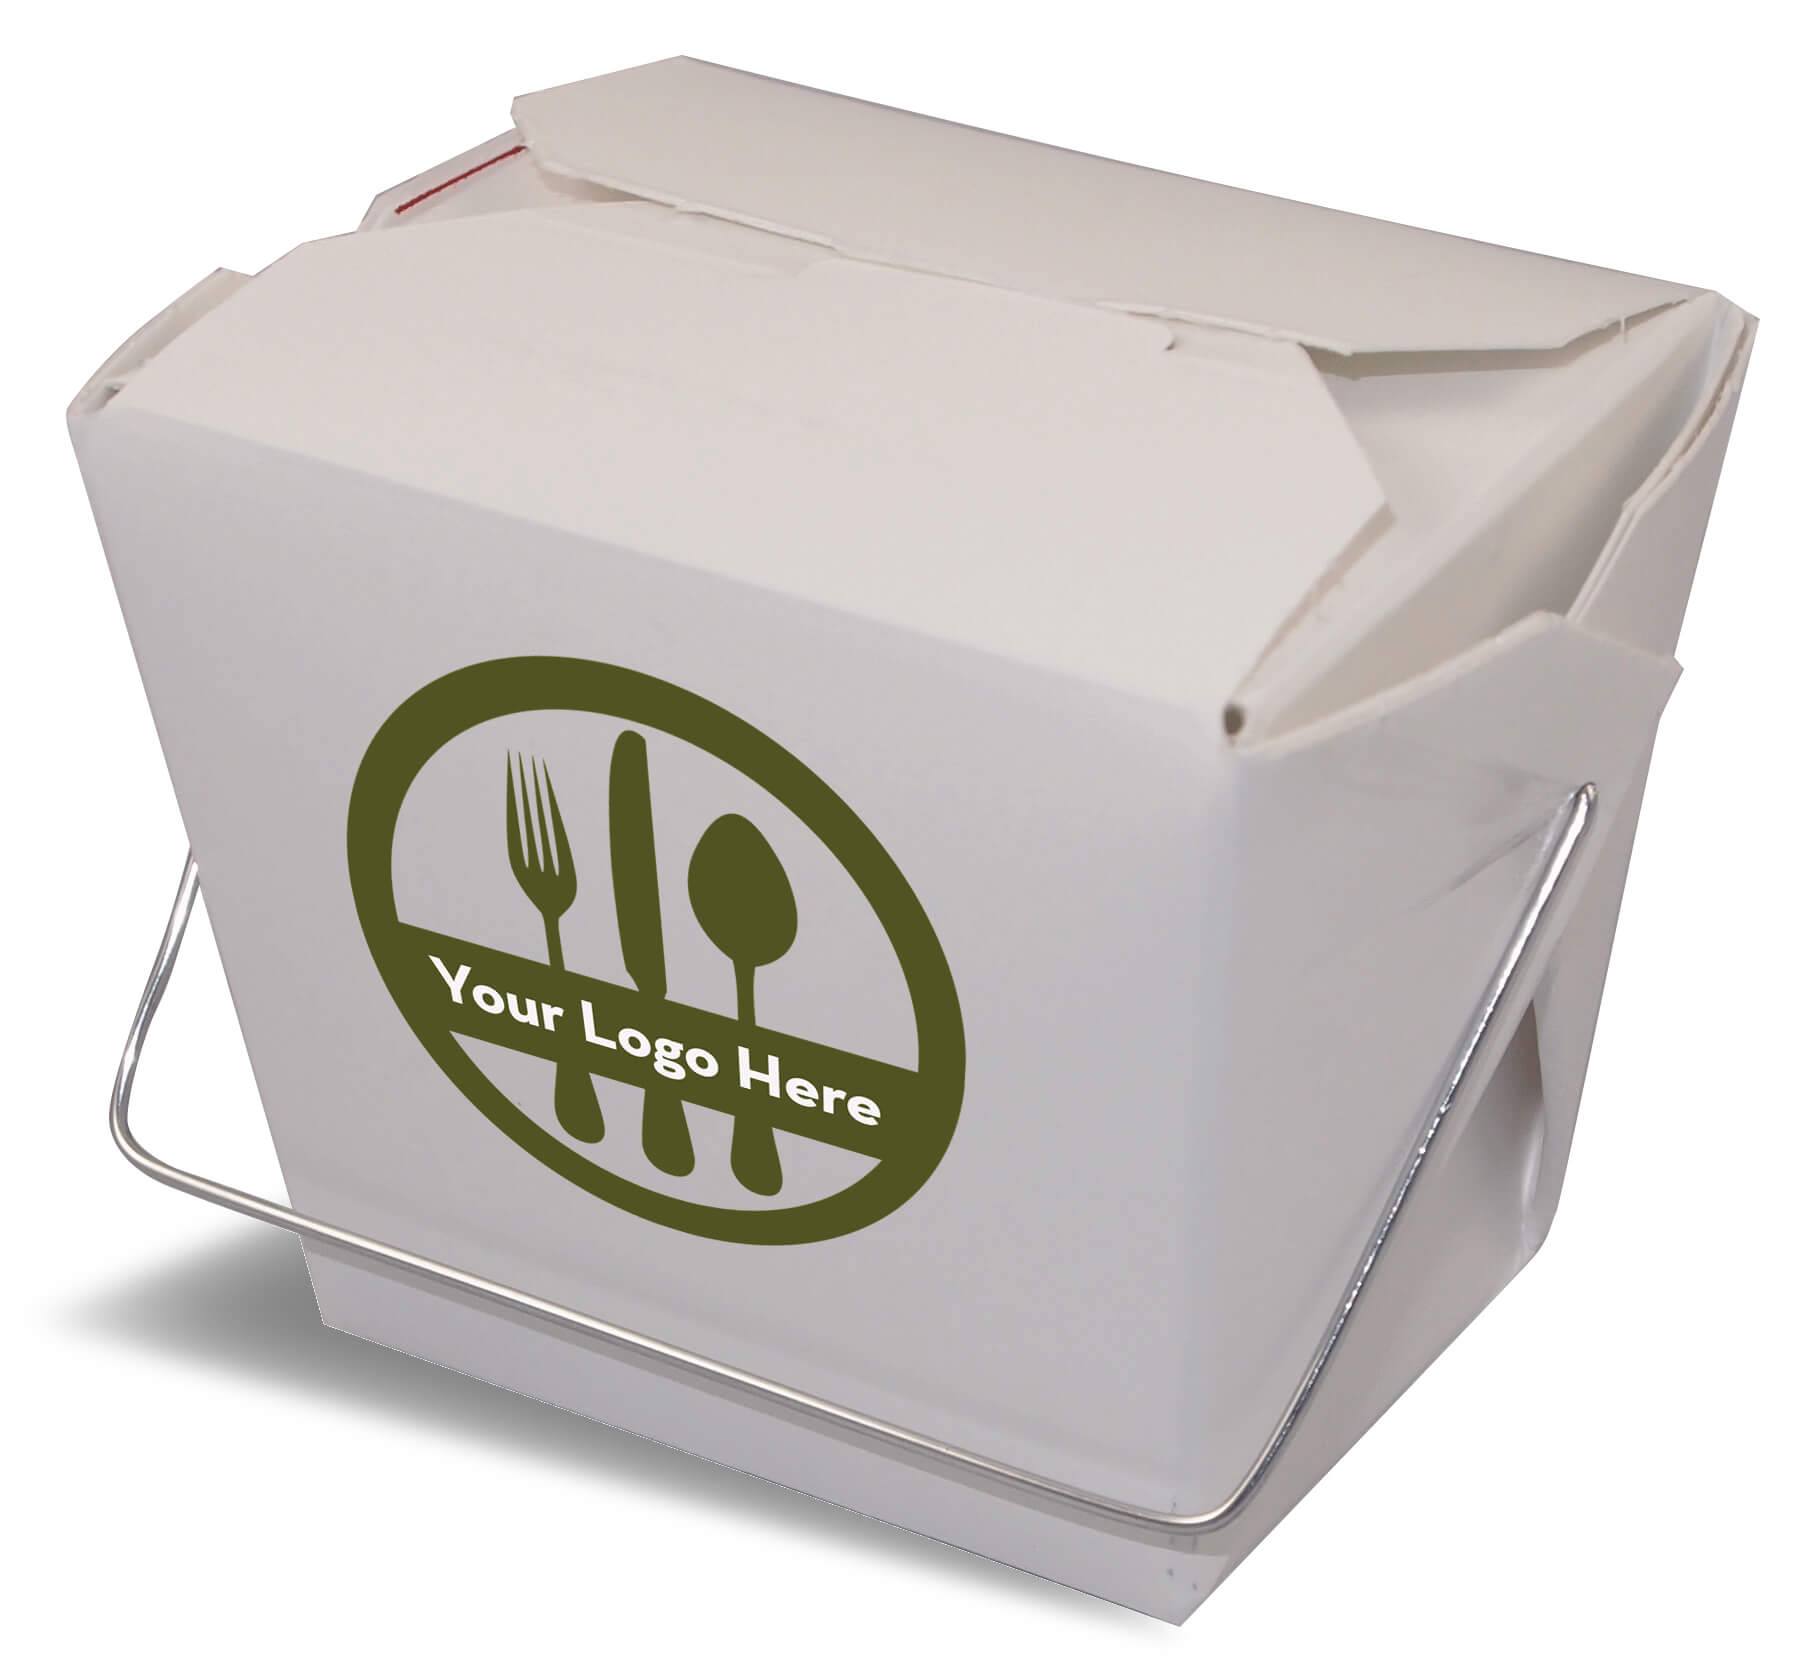 A rendering of a closed Fold-Pak Chinese food folding carton container with a printed logo.